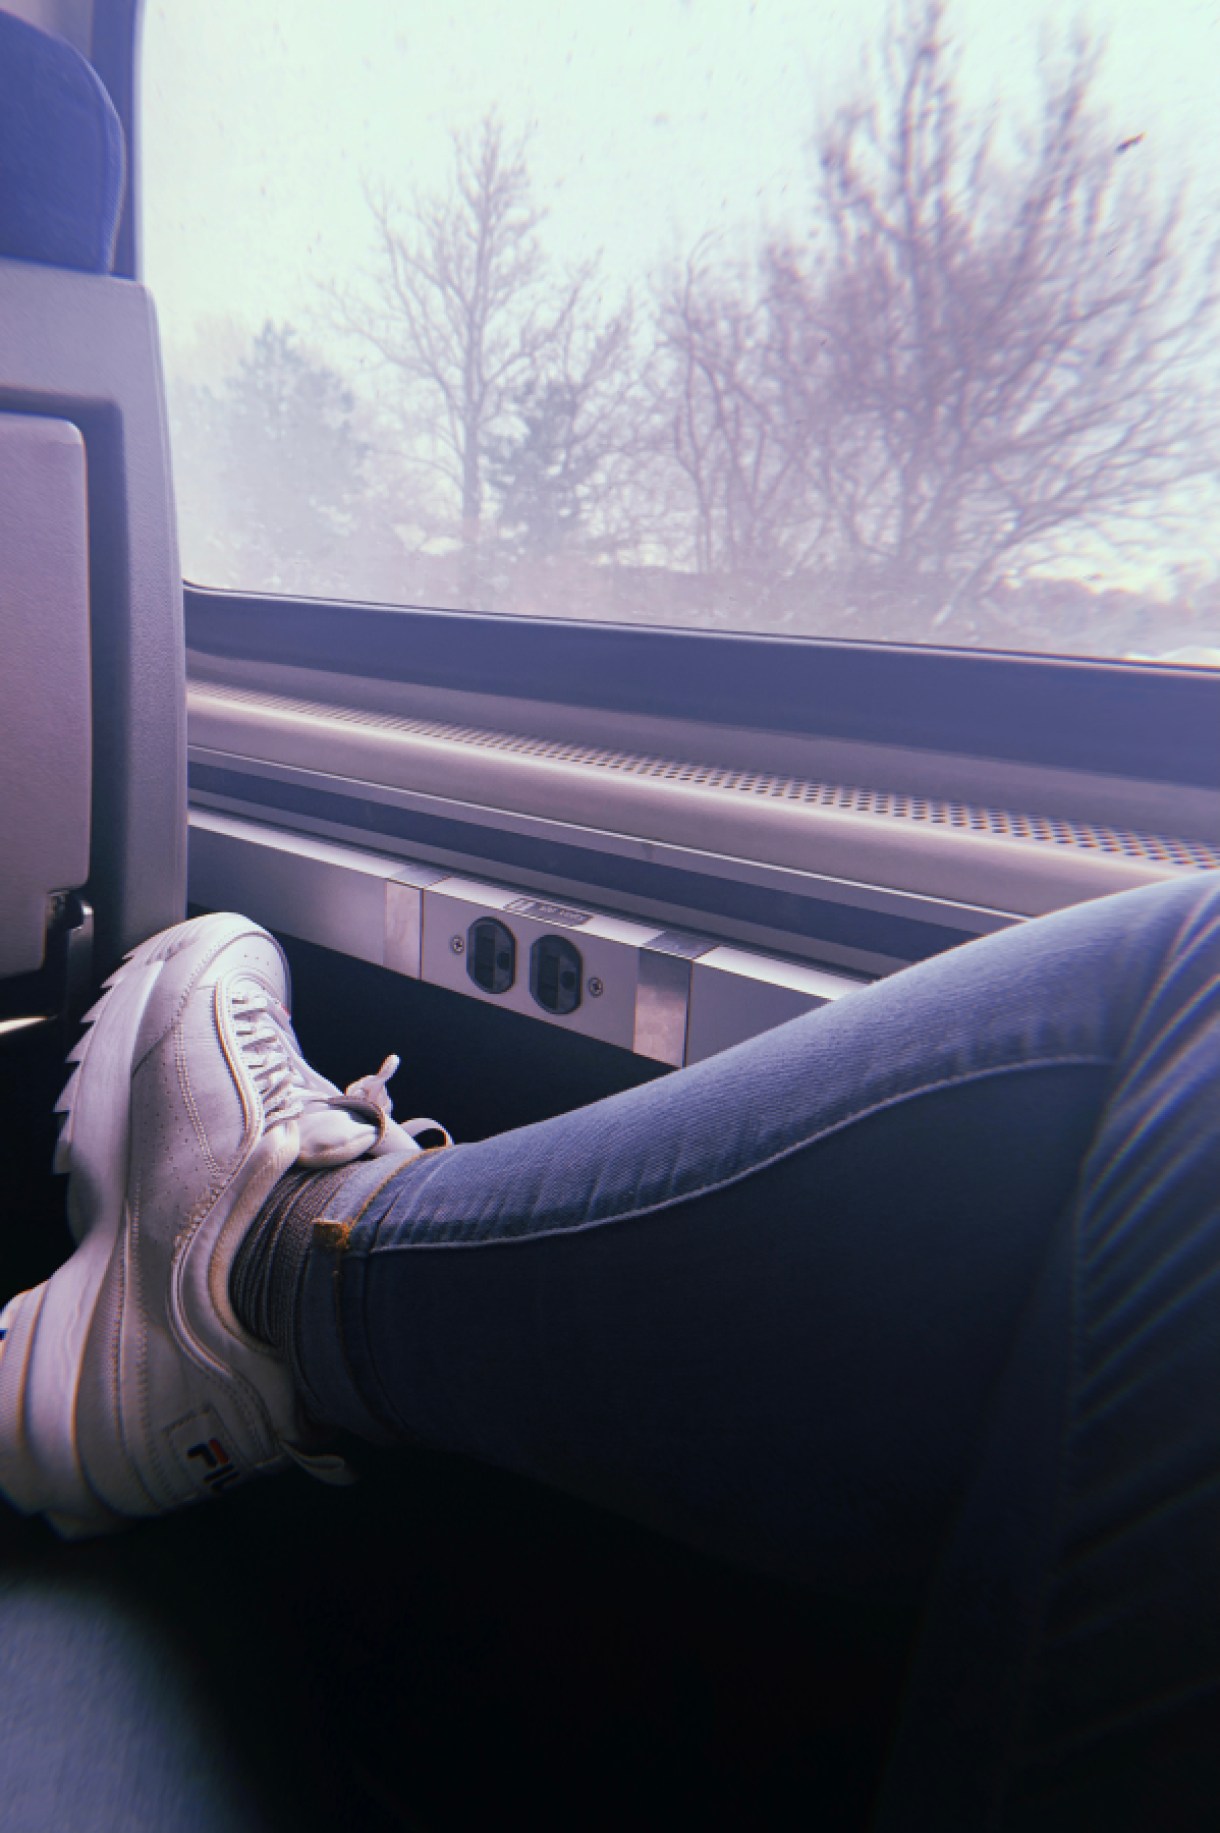 Image shows a view of trees outside from inside a train car. There is a leg in the frame, wearing jeans and sneakers in the shot as well.